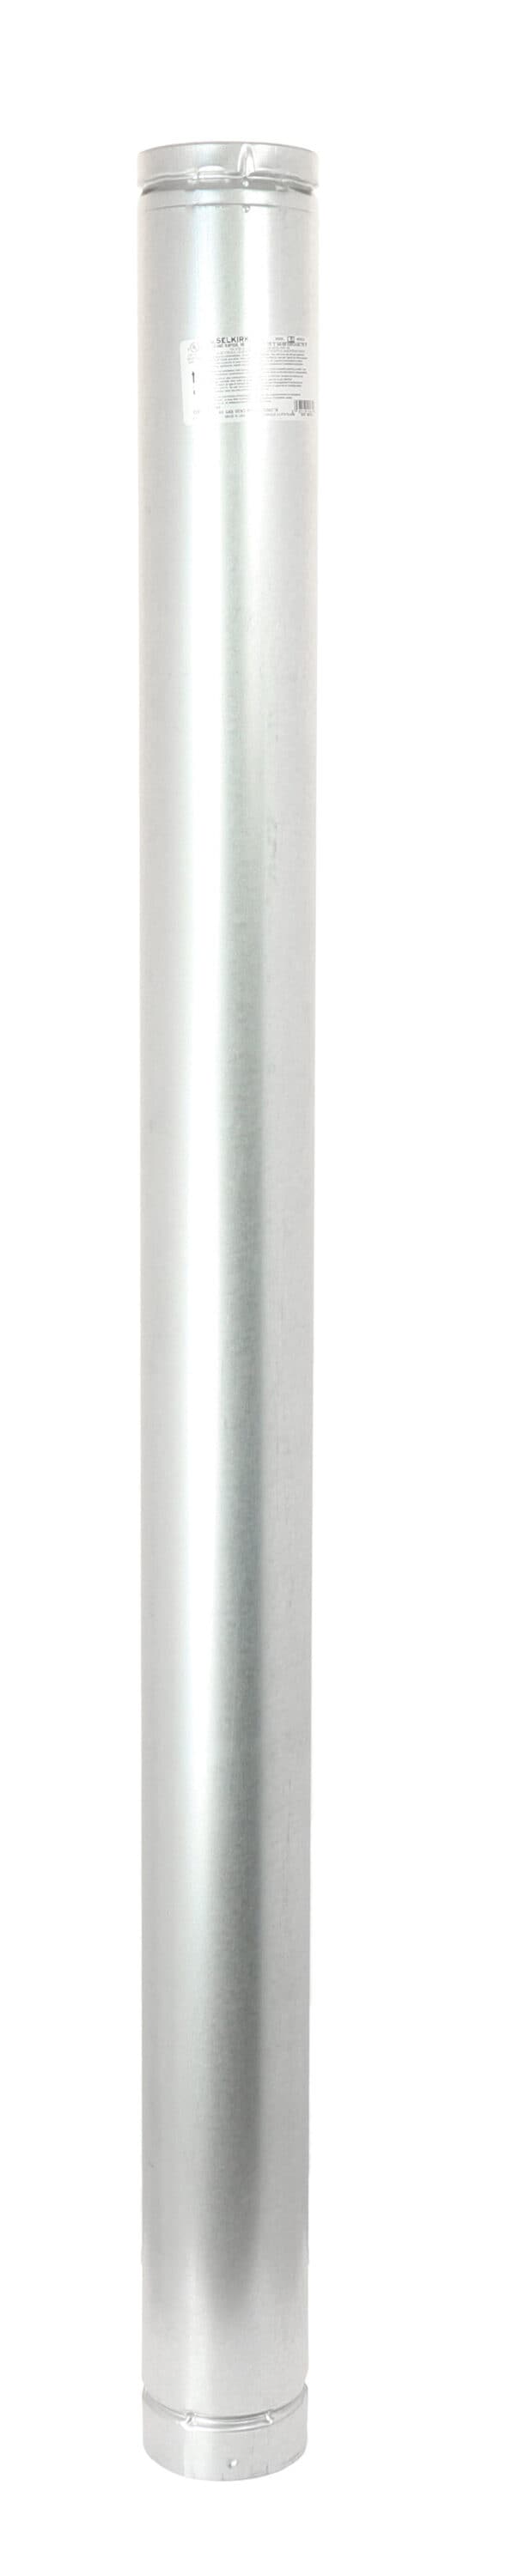 Selkirk 3-in x 5-ft Galvanized Steel/Aluminum Gas Vent Pipe - UL441  Approved, Type B, Round/Oval Shape for Residential/Commercial/Industrial  Use in the Galvanized Pipe & Fittings department at